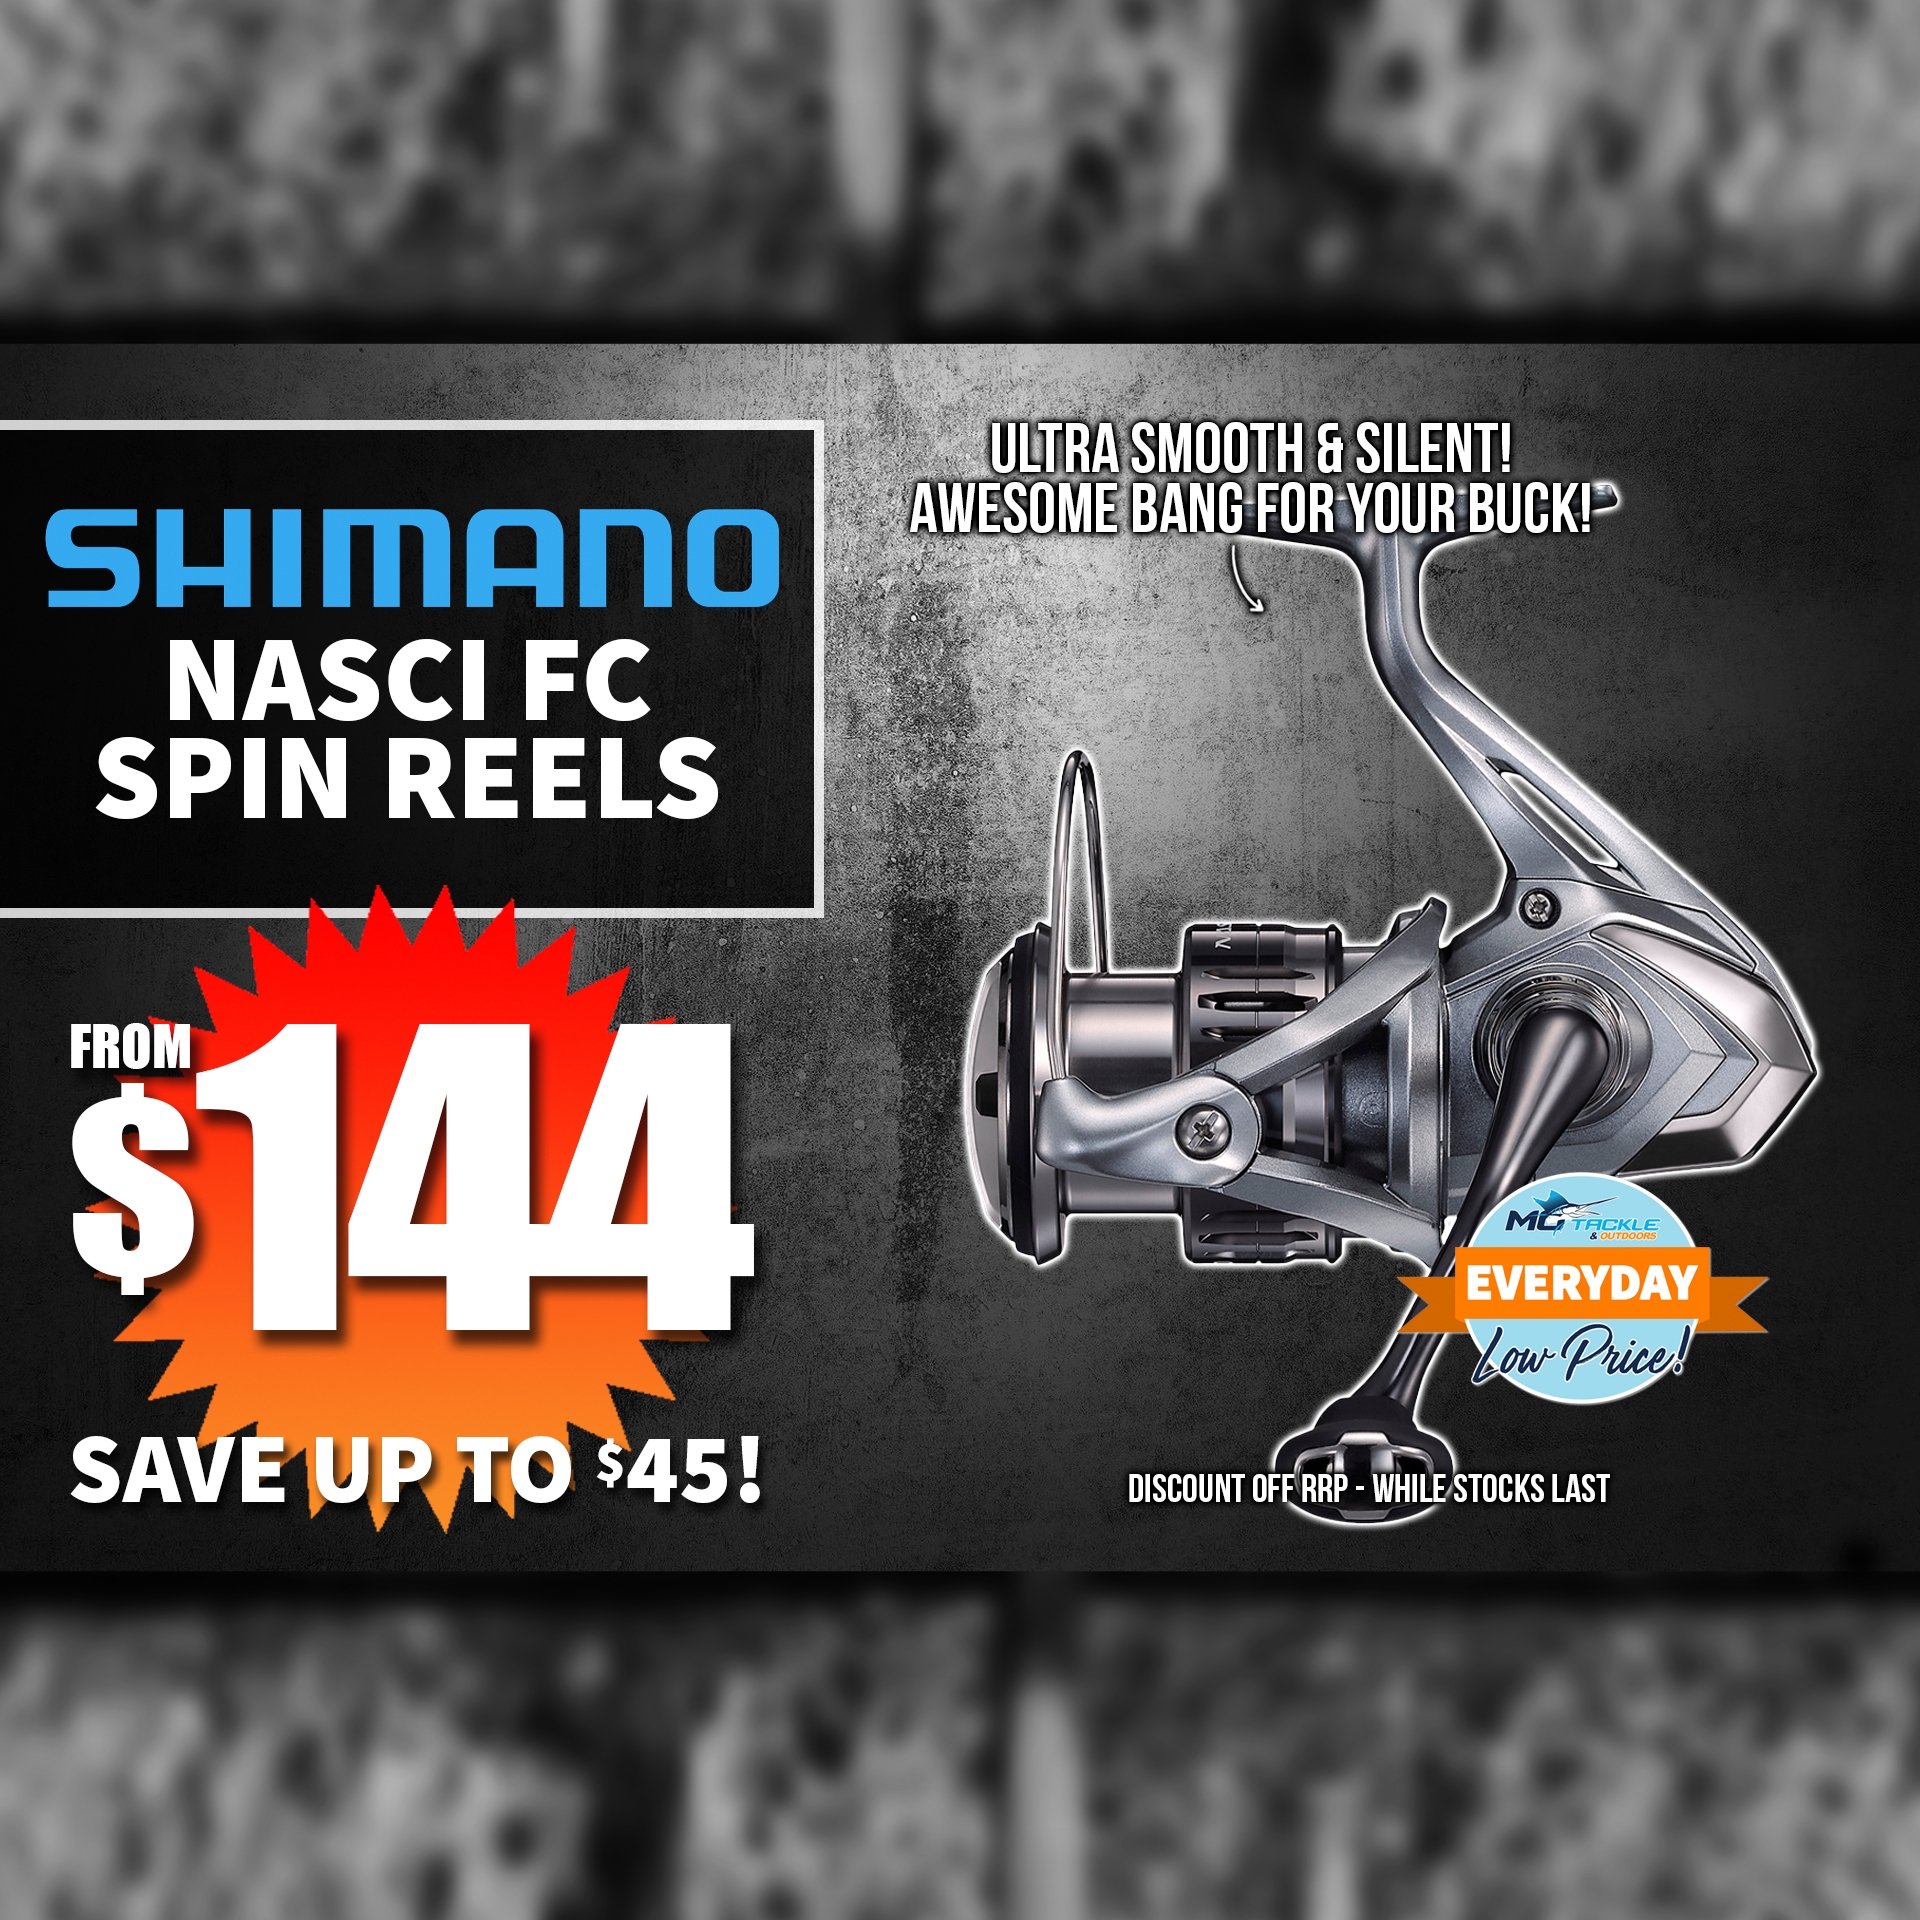 SHIMANO NASCI FC SPIN REEL from $144